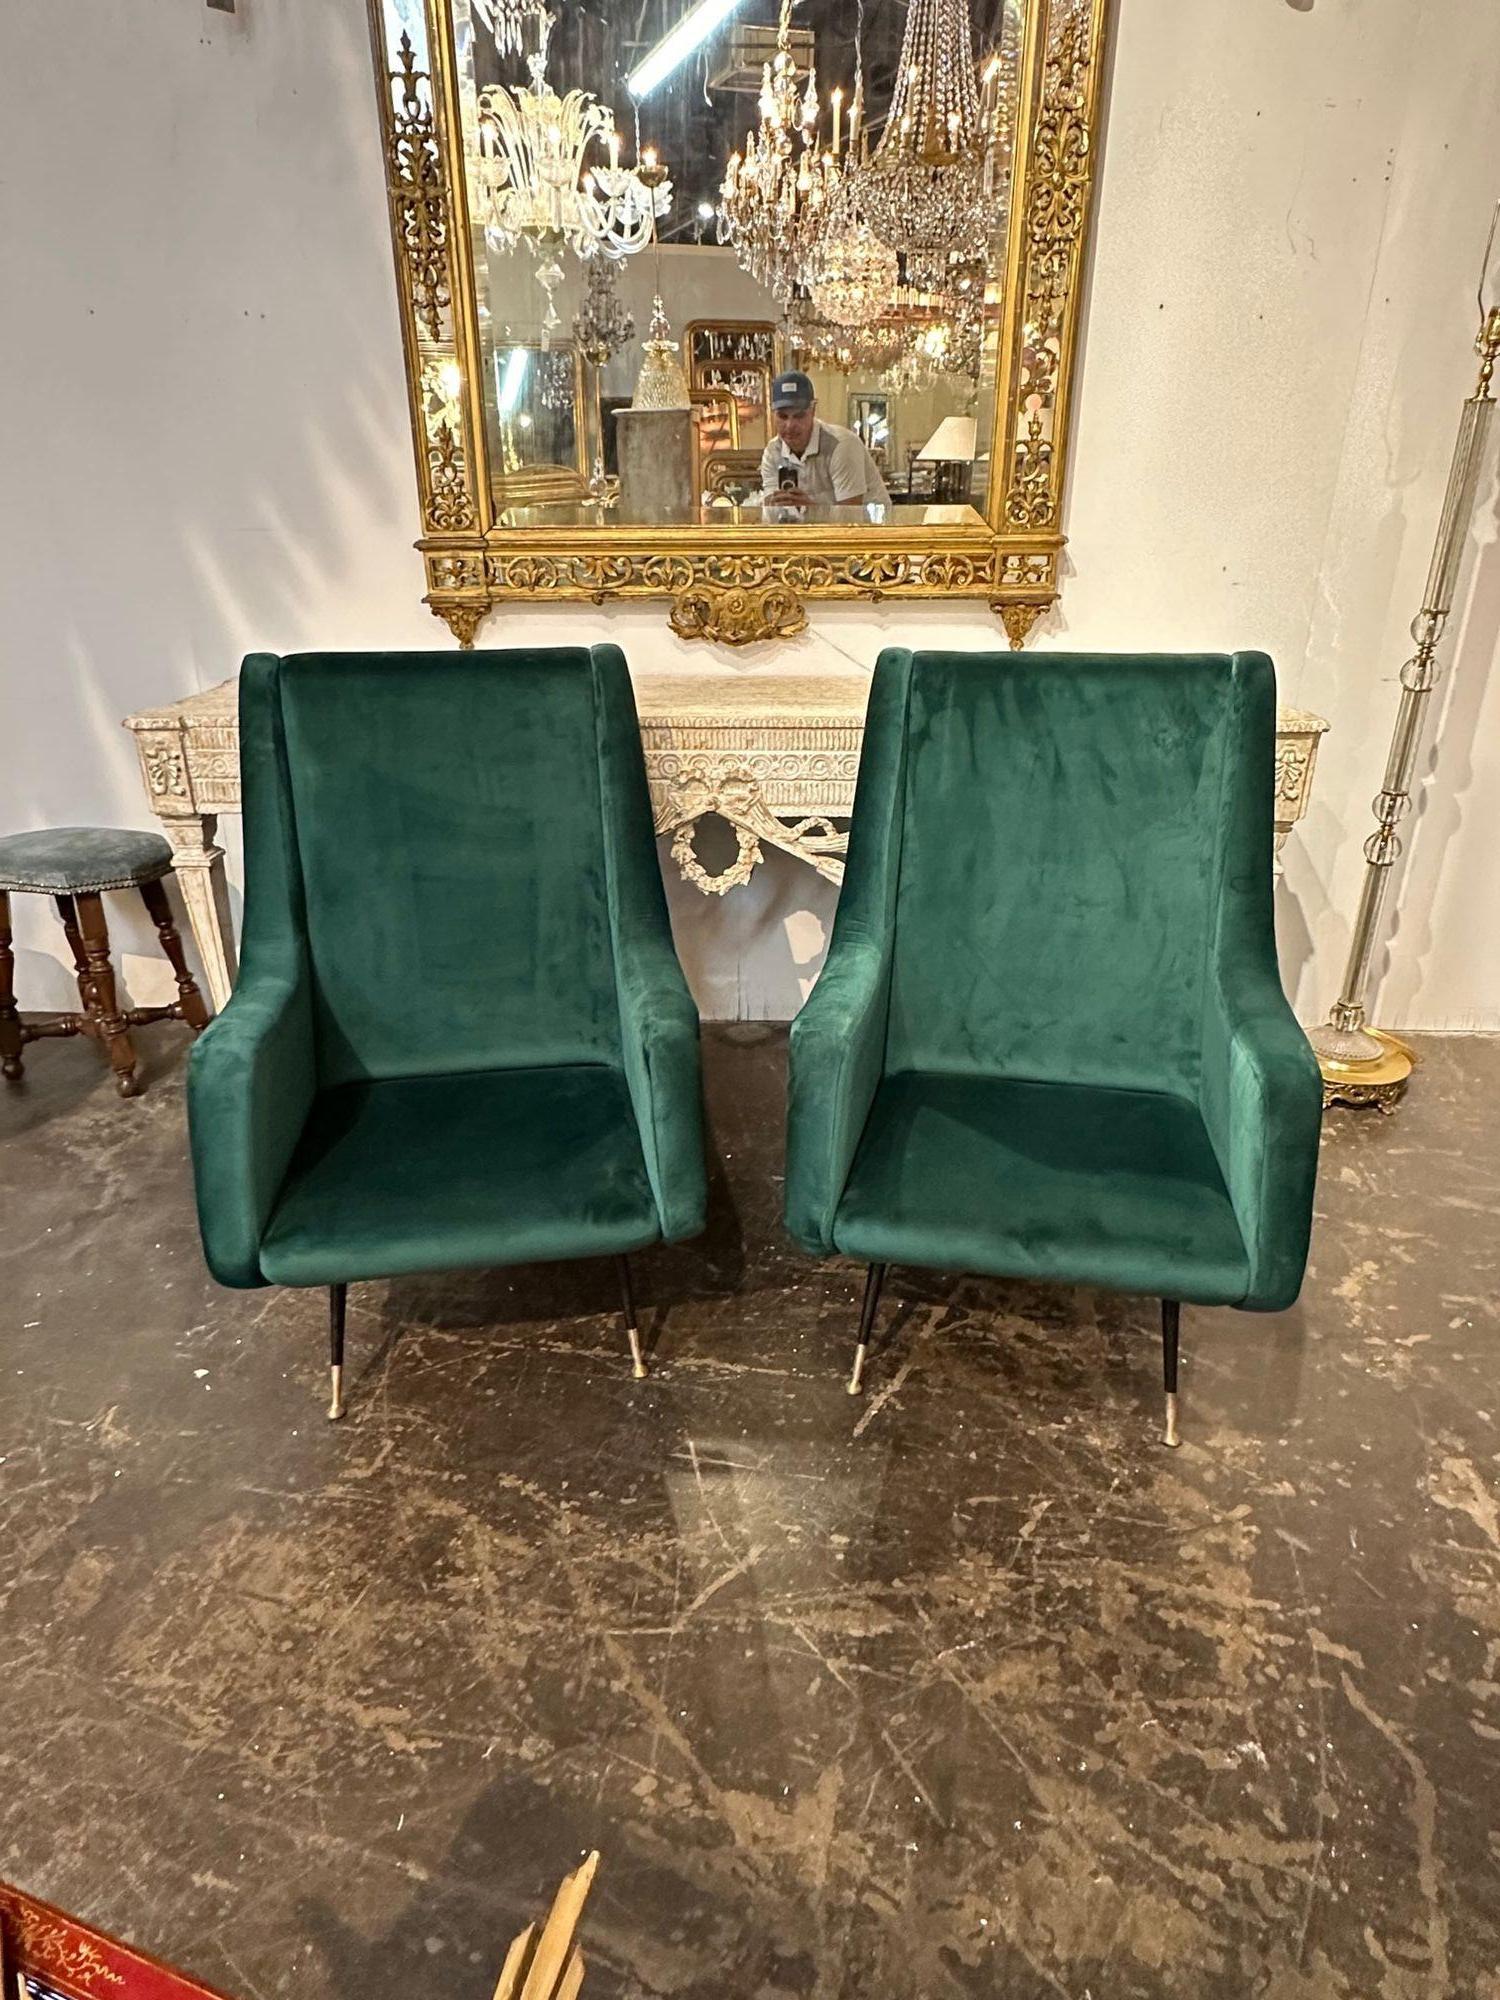 Handsome pair of Italian green velvet Mid-Century Modern high back chairs after Marco Zanuso. Makes a stylish statement!